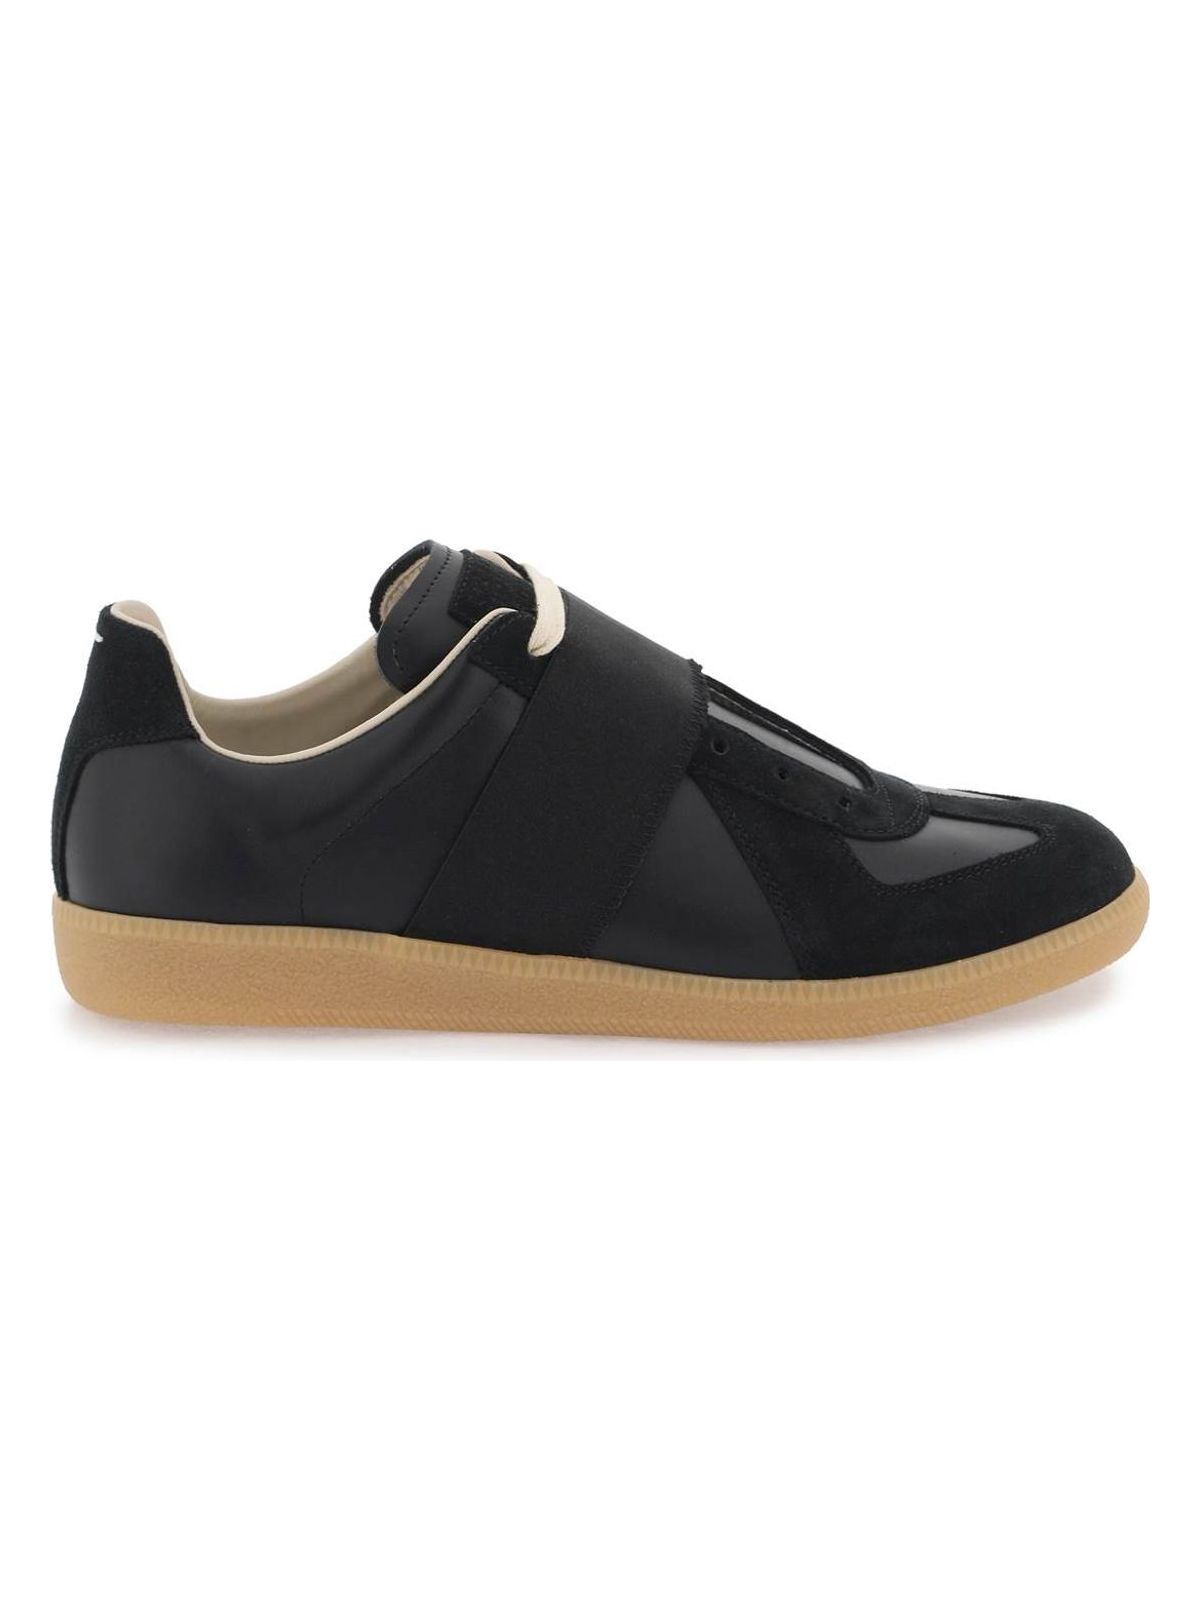 H9966 MAISON MARGIELA REPLICA SNEAKERS WITH ELASTIC BAND